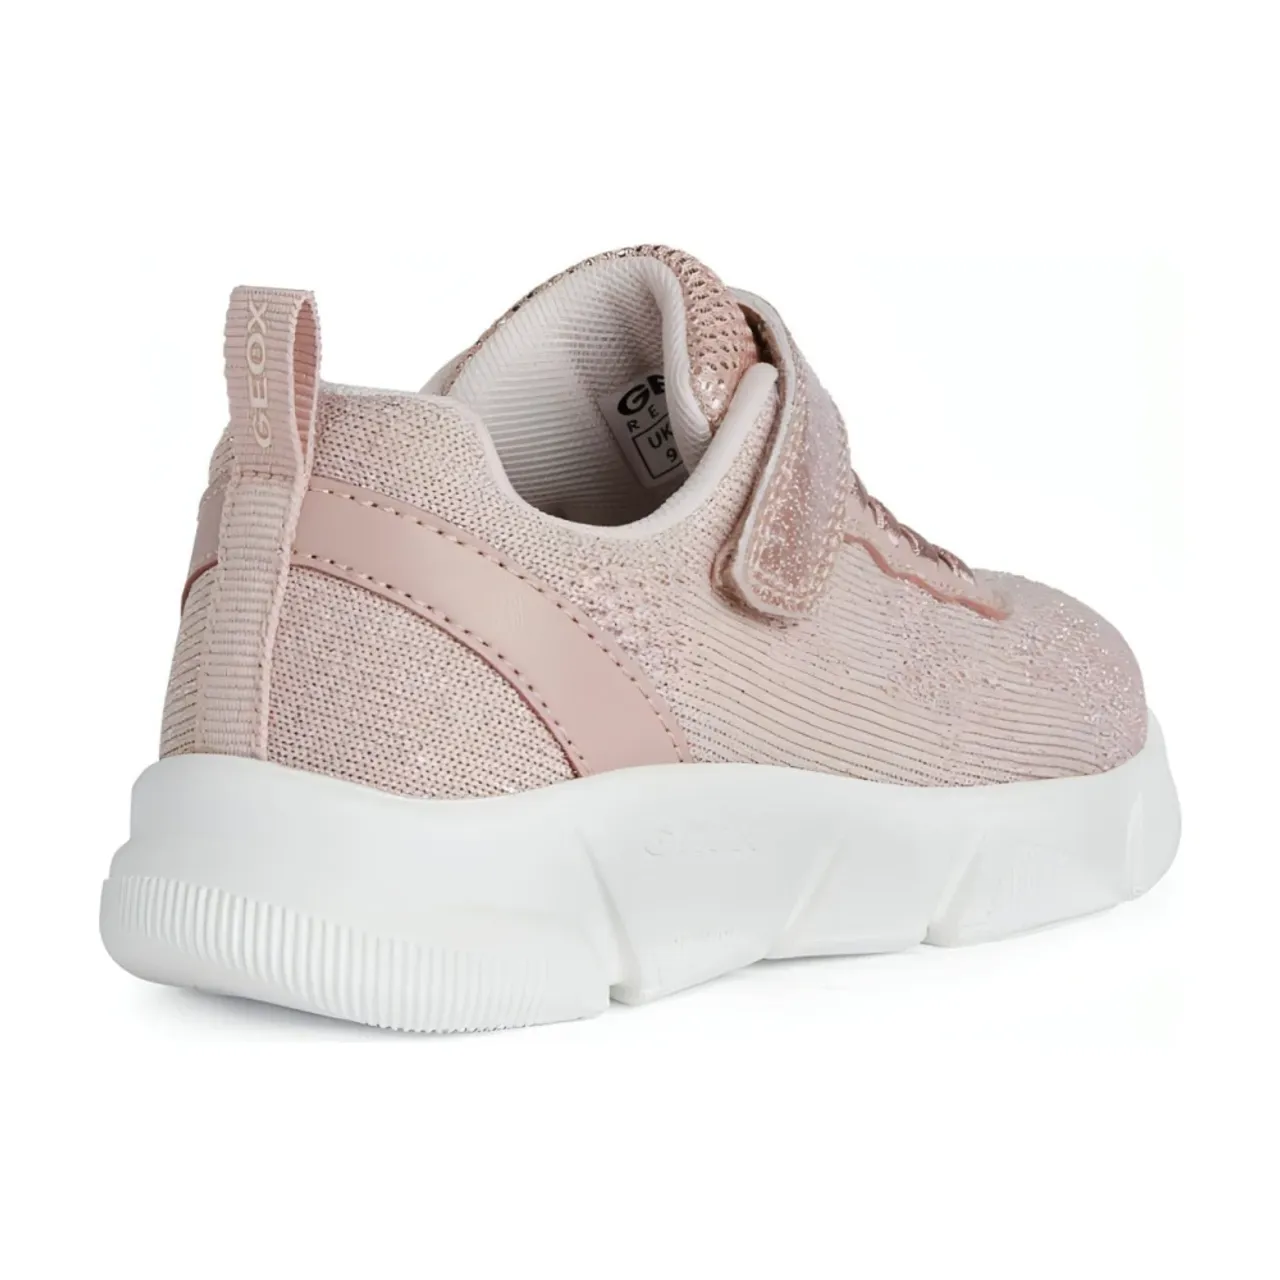 Geox , aril sport shoes ,Pink female, Sizes: